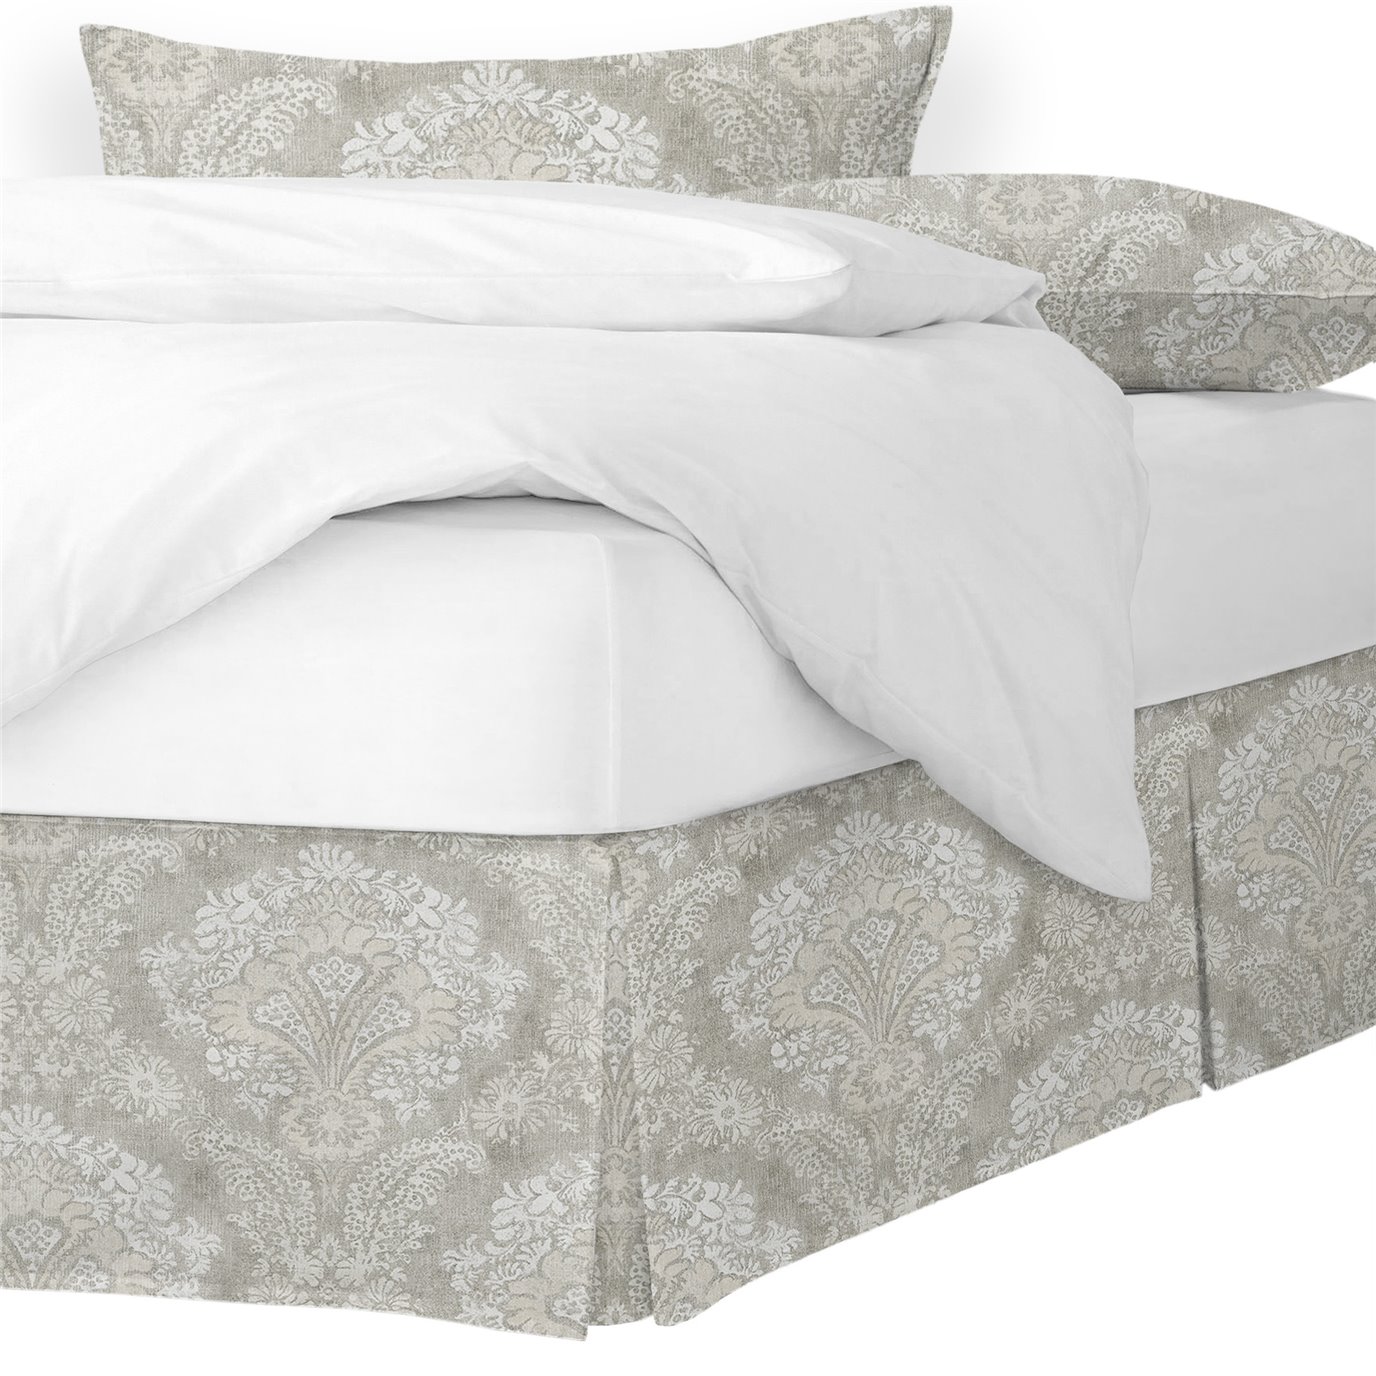 Ophelia Stone Full/Double Bed Skirt 15" drop